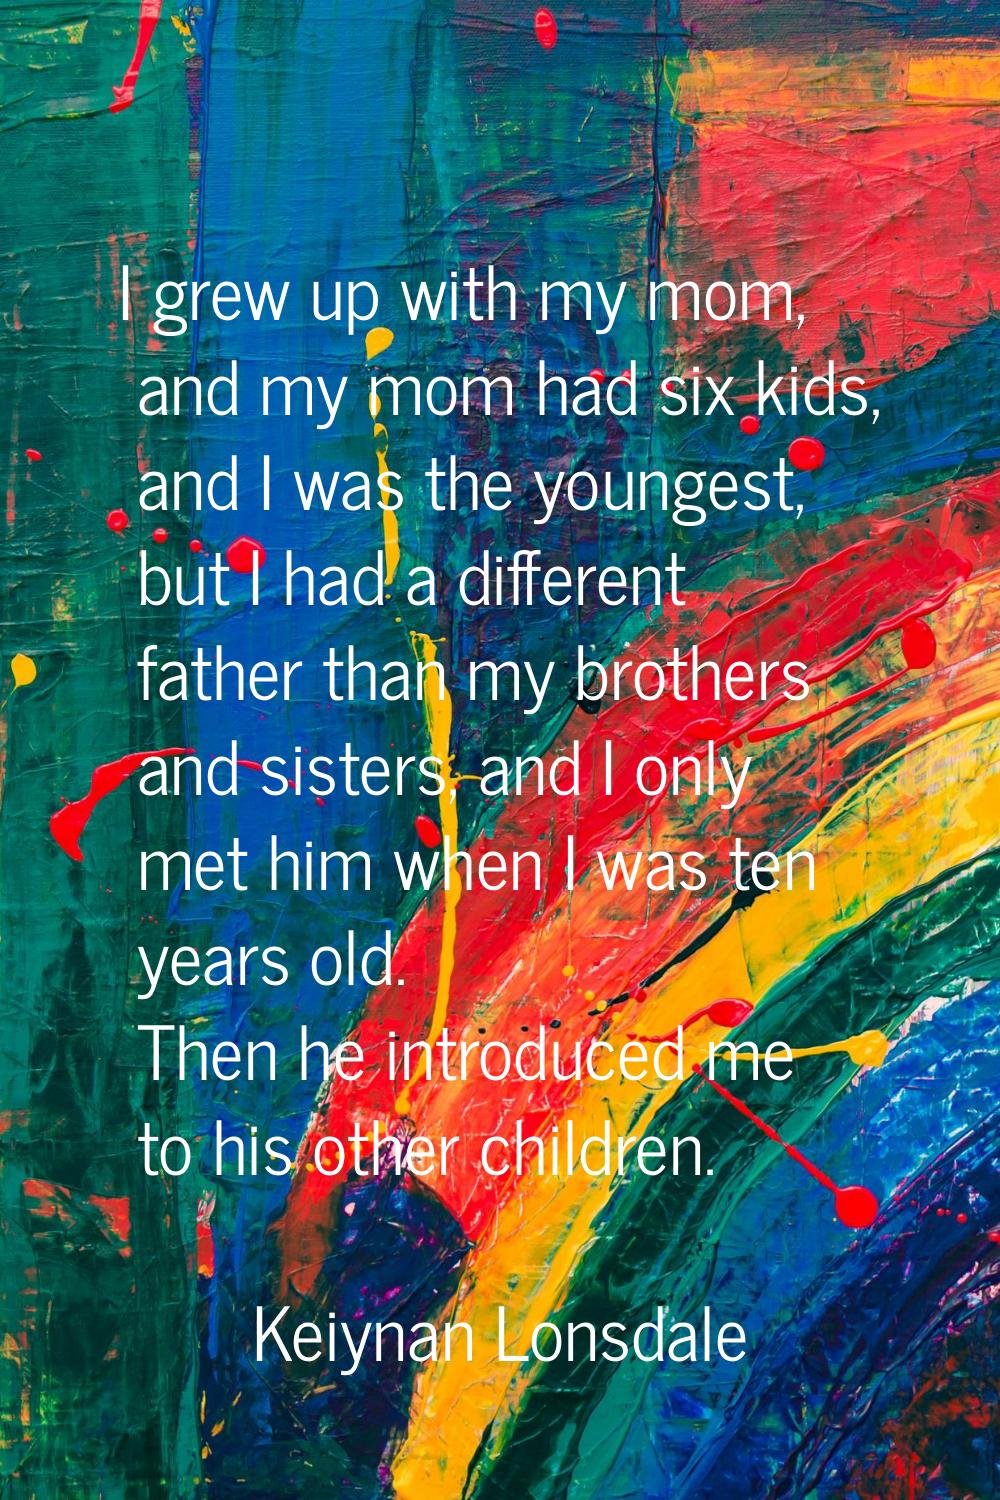 I grew up with my mom, and my mom had six kids, and I was the youngest, but I had a different fathe